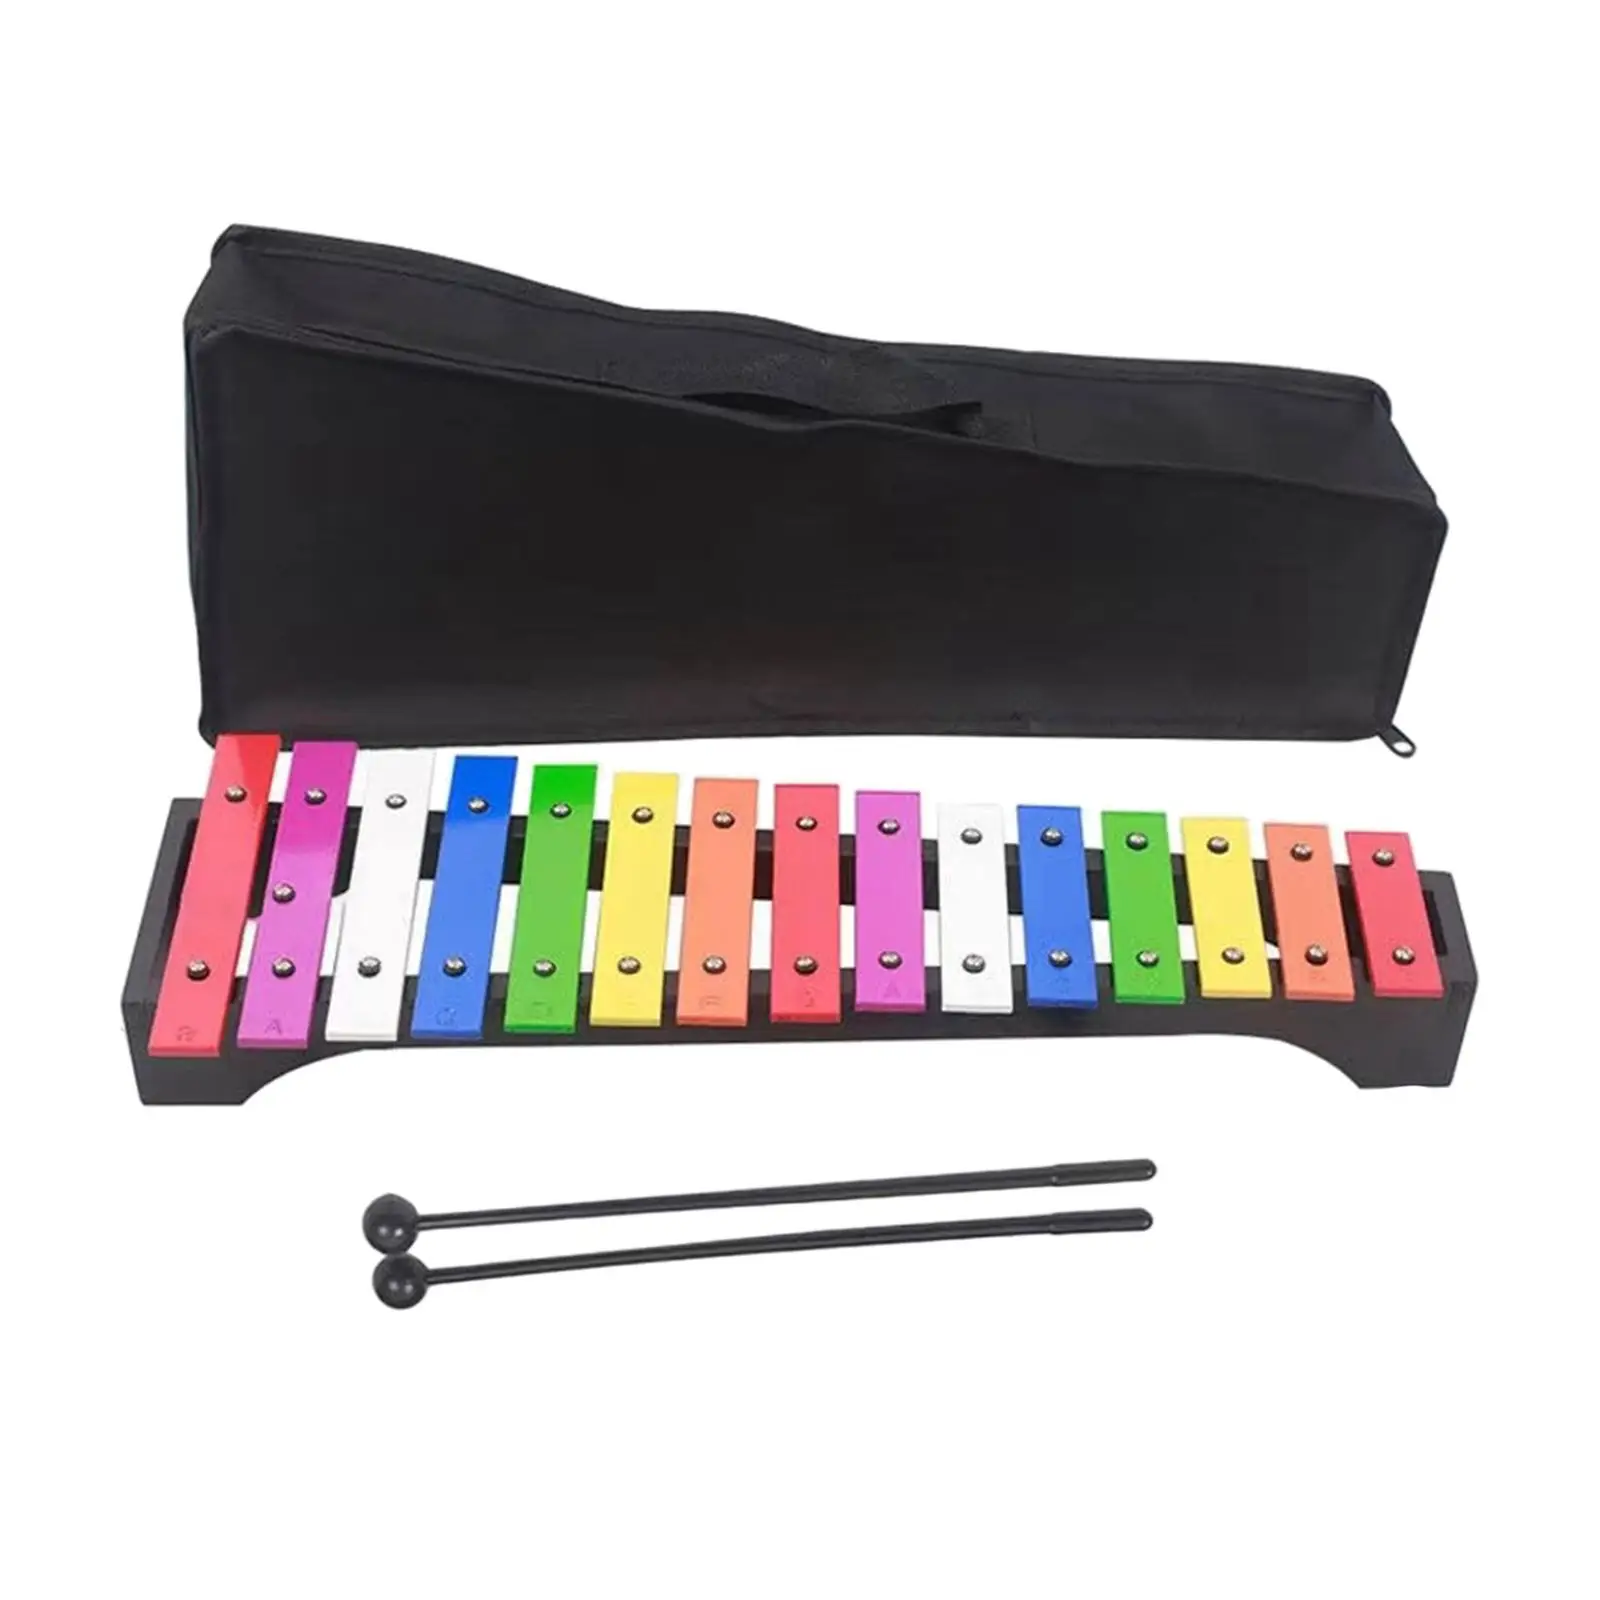 15 Note Glockenspiel Metal Enlightenment Hand Knock Piano Toy for Outside Concert Event School Orchestras Live Performance